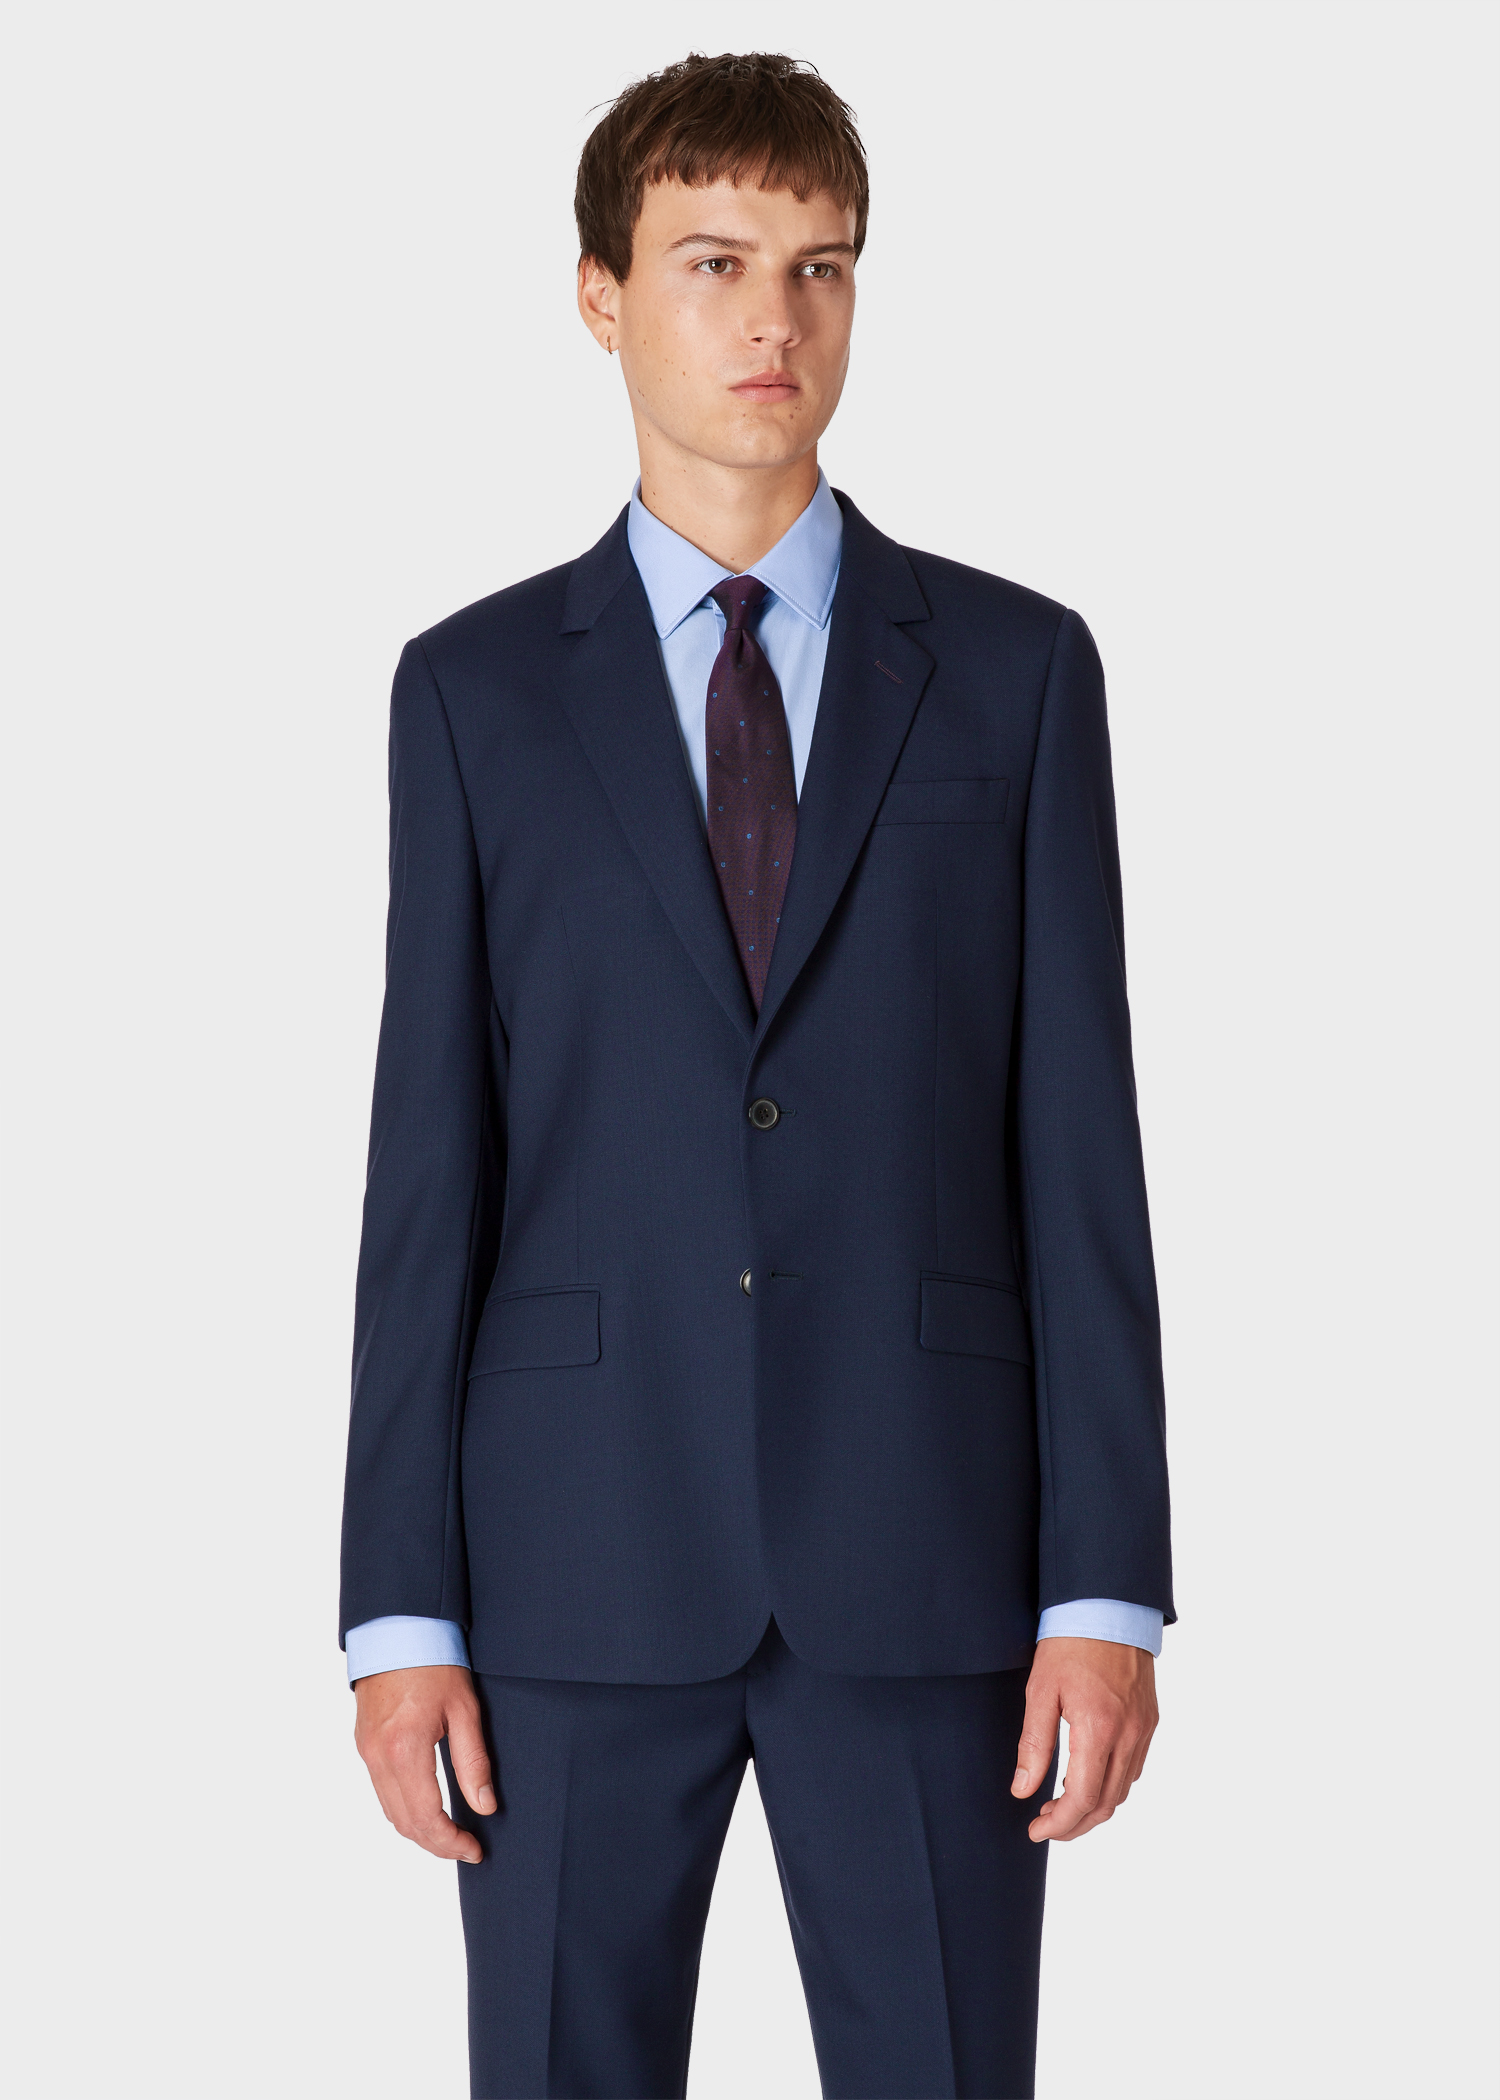 Model front blazer view - The Piccadilly - Men's Tailored-Fit Navy Blue Wool Suit 'A Suit To Travel In'